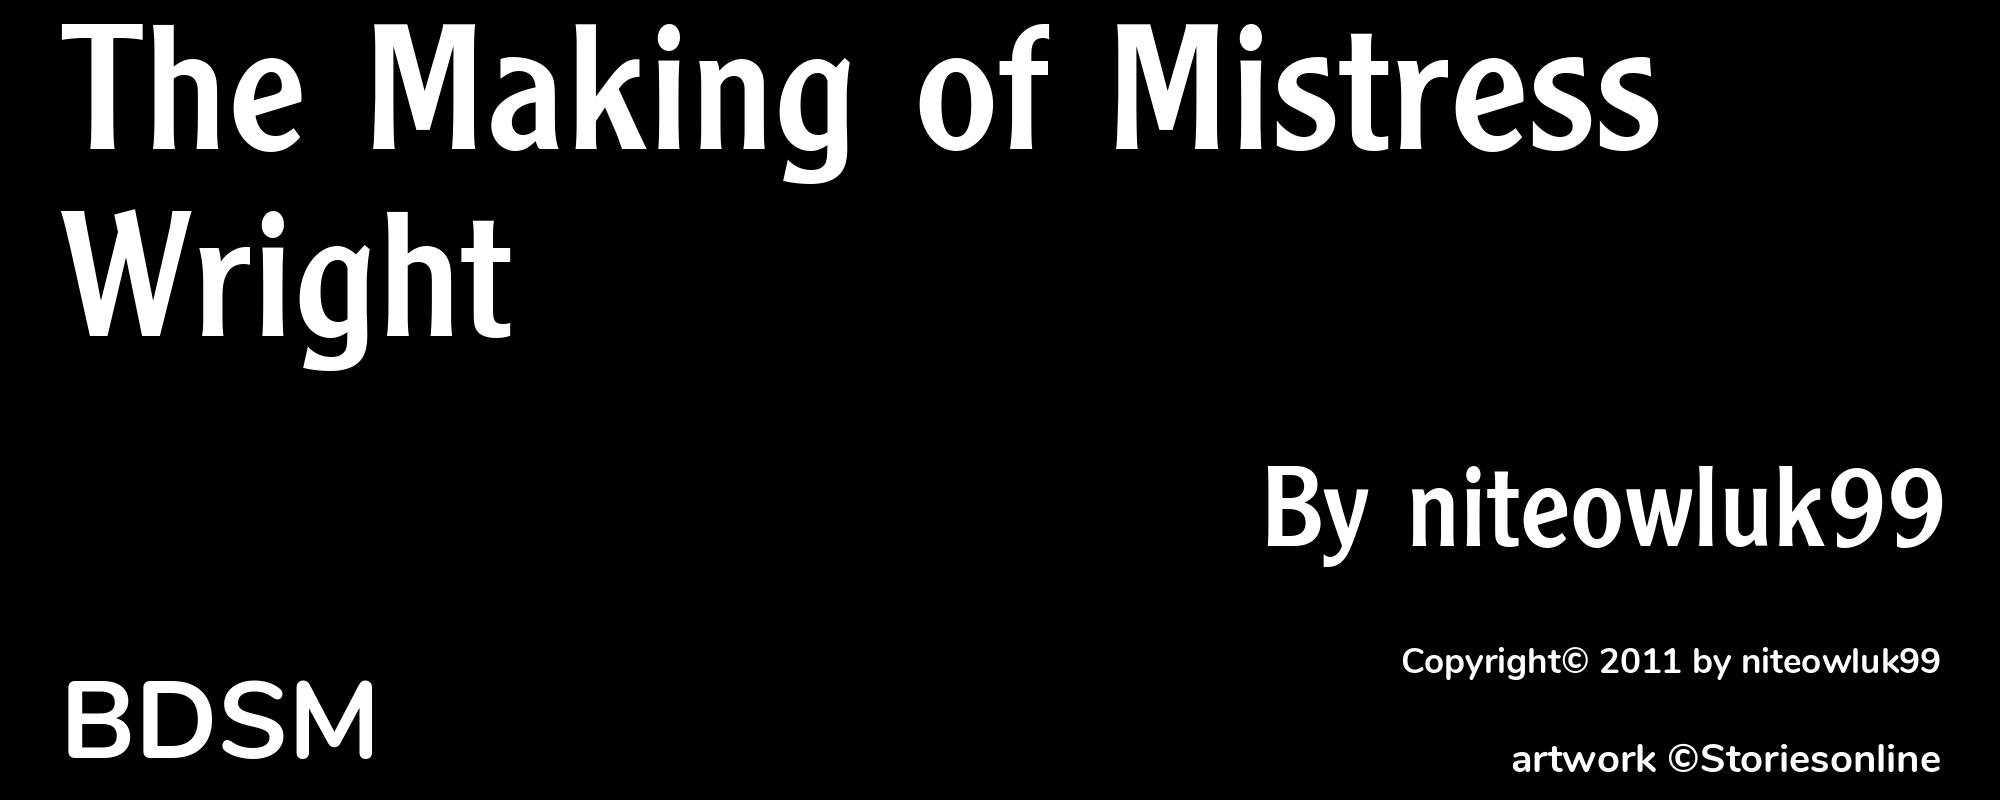 The Making of Mistress Wright - Cover